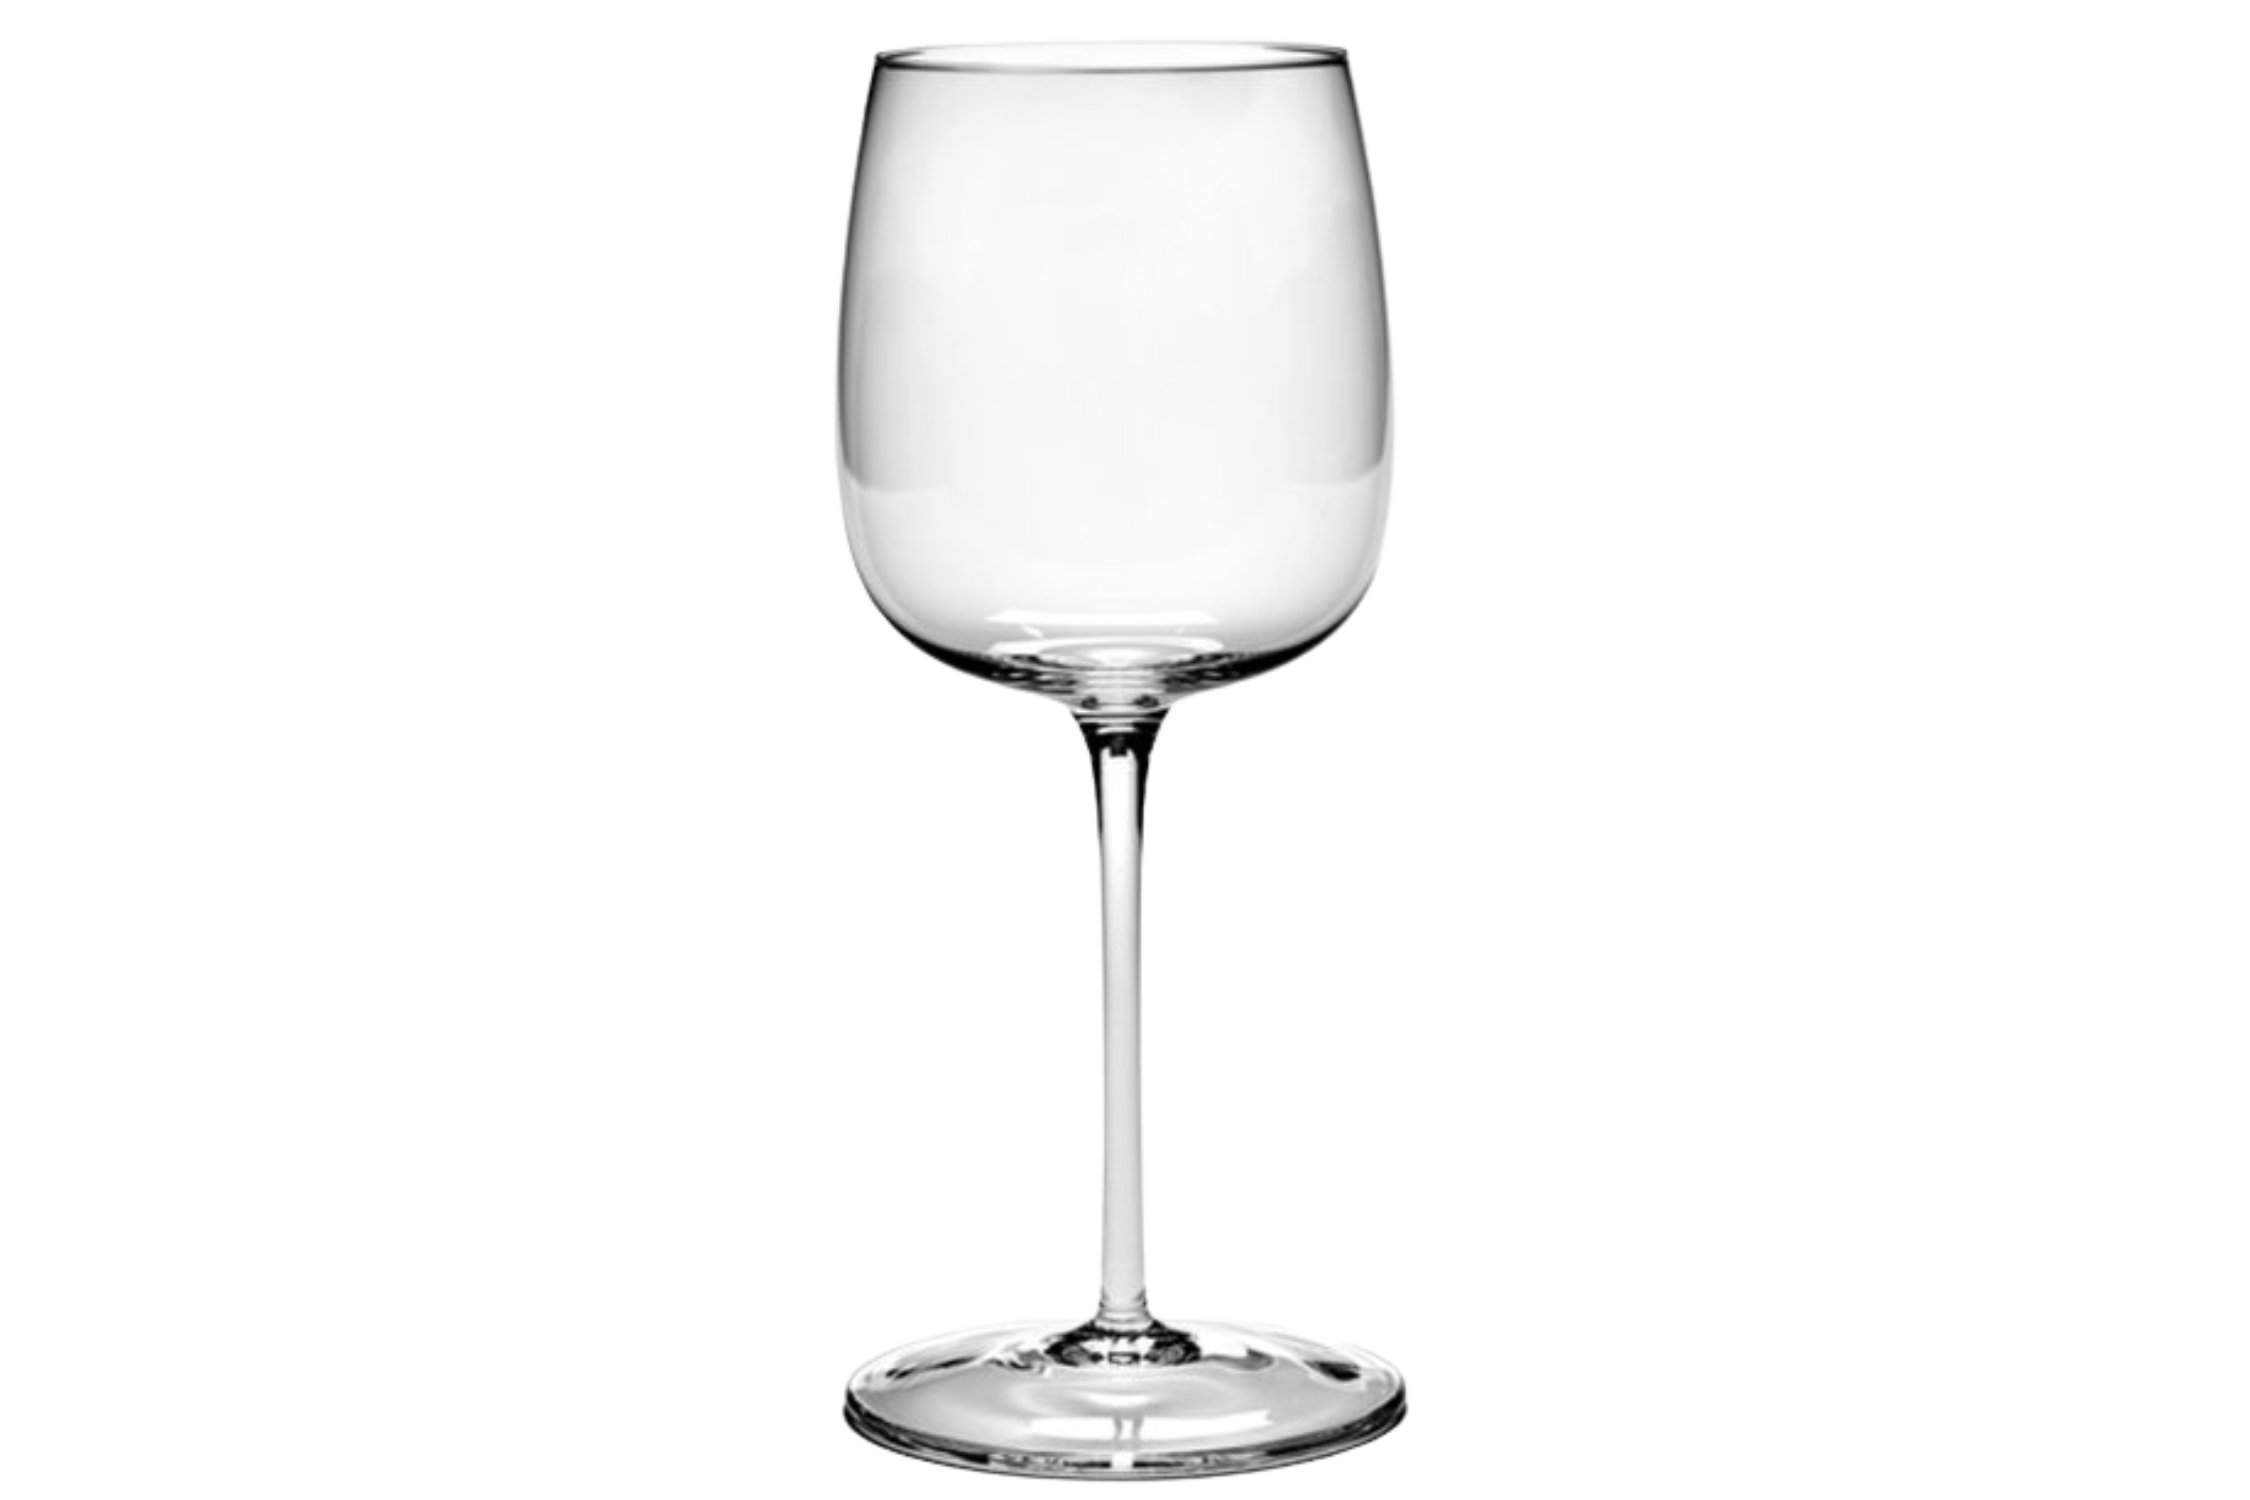 Serax Passe-Partout Curved Wine Glass - Set of 4 by Vincent Van Duysen